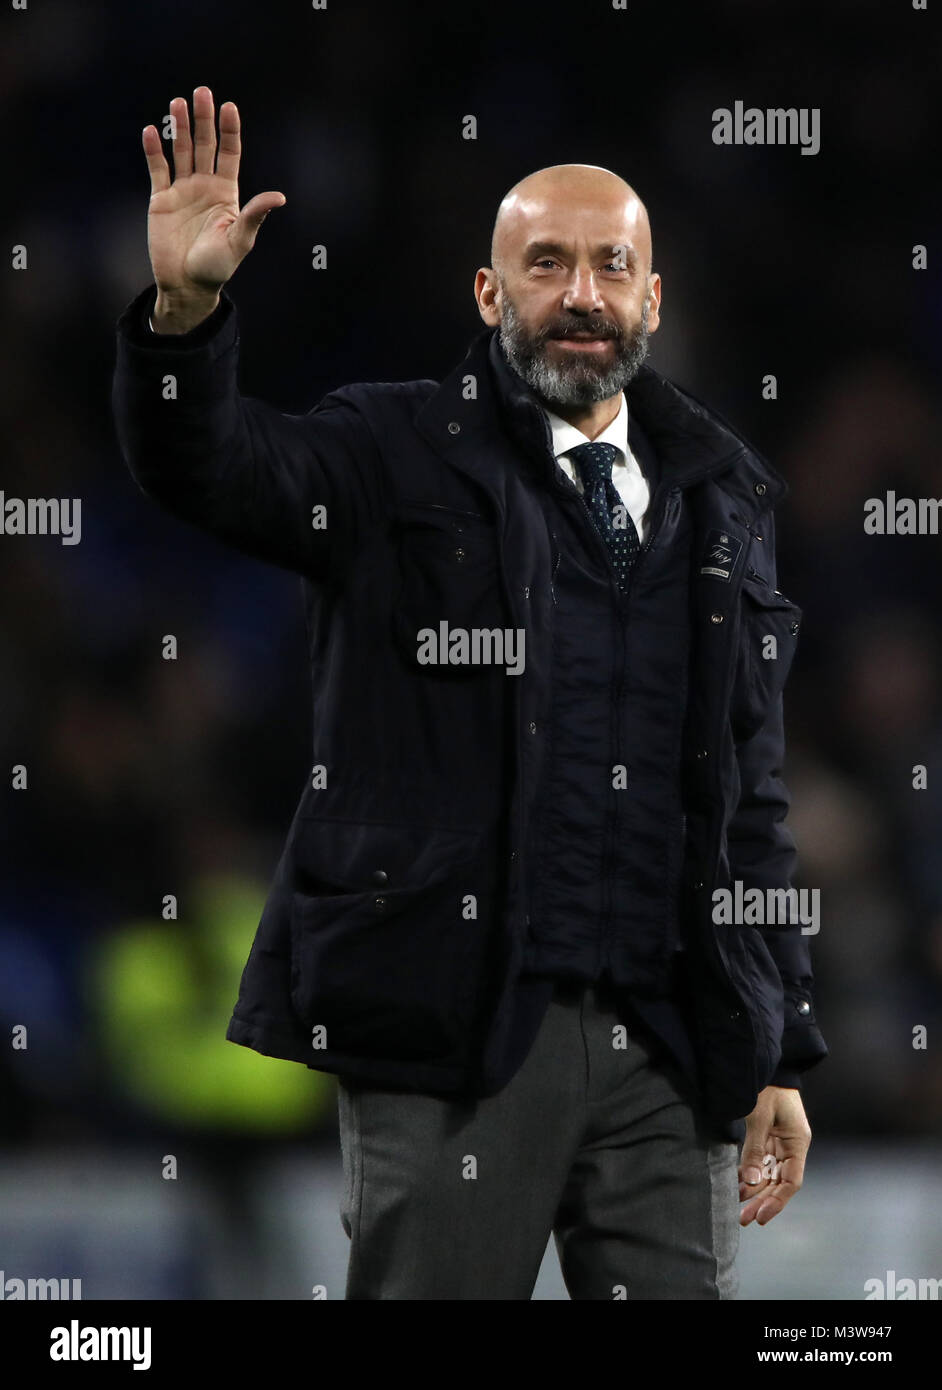 Former Chelsea player Gianluca Vialli during the Premier League match at Stamford Bridge, London. PRESS ASSOCIATION Photo. Picture date: Monday February 12, 2018. See PA story SOCCER Chelsea. Photo credit should read: Nick Potts/PA Wire. RESTRICTIONS: No use with unauthorised audio, video, data, fixture lists, club/league logos or 'live' services. Online in-match use limited to 75 images, no video emulation. No use in betting, games or single club/league/player publications. Stock Photo